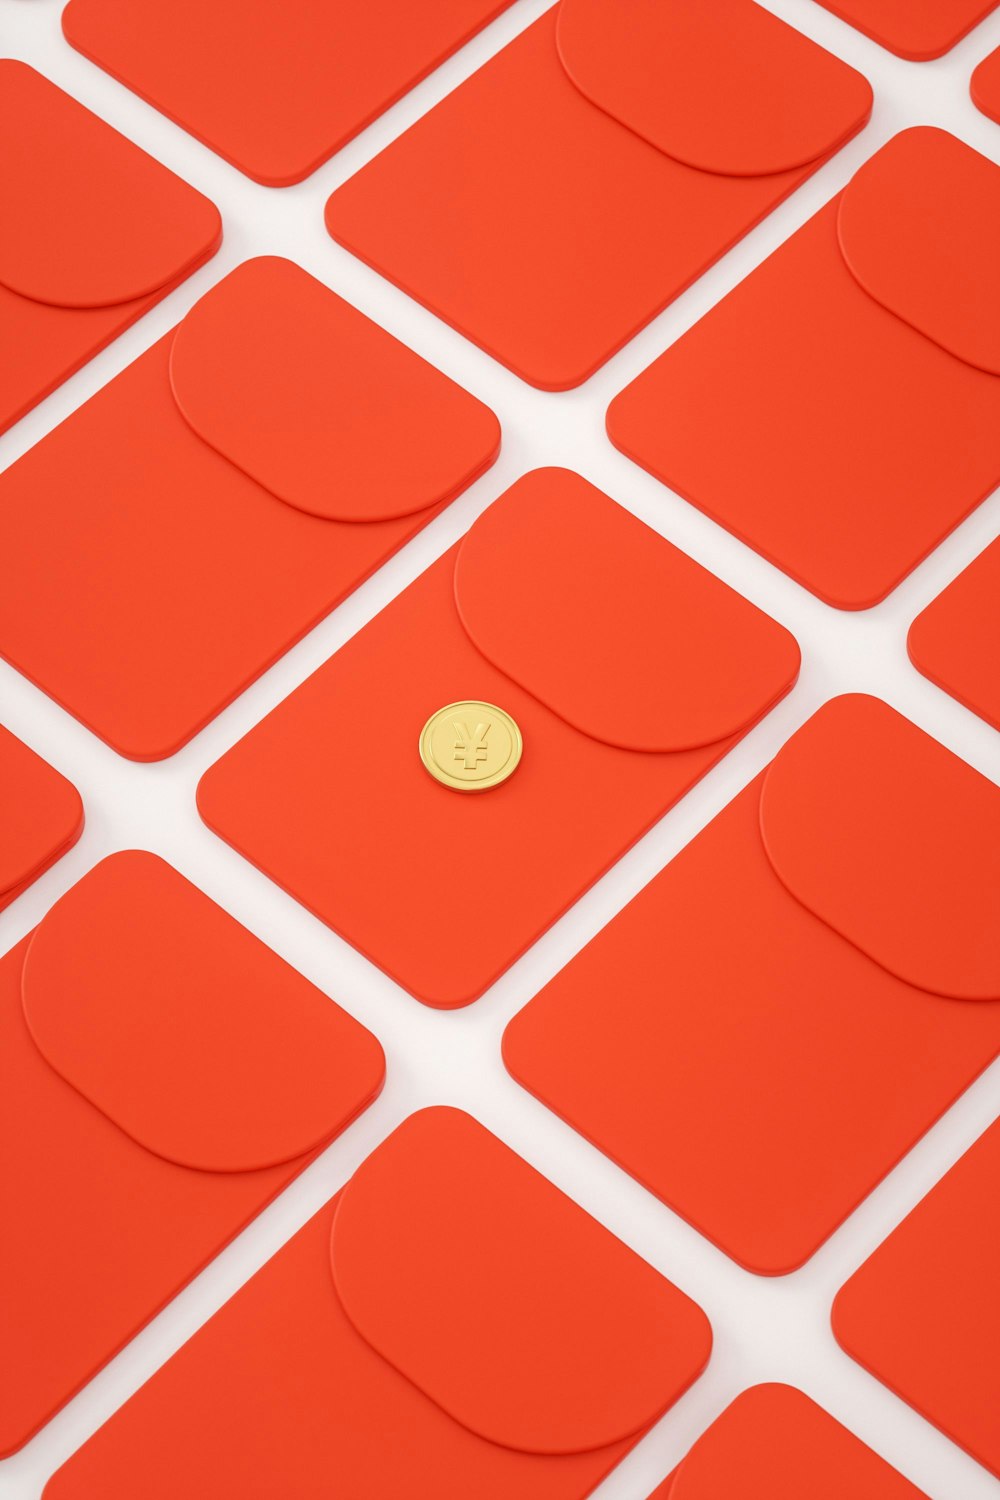 a gold button sitting on top of a red surface